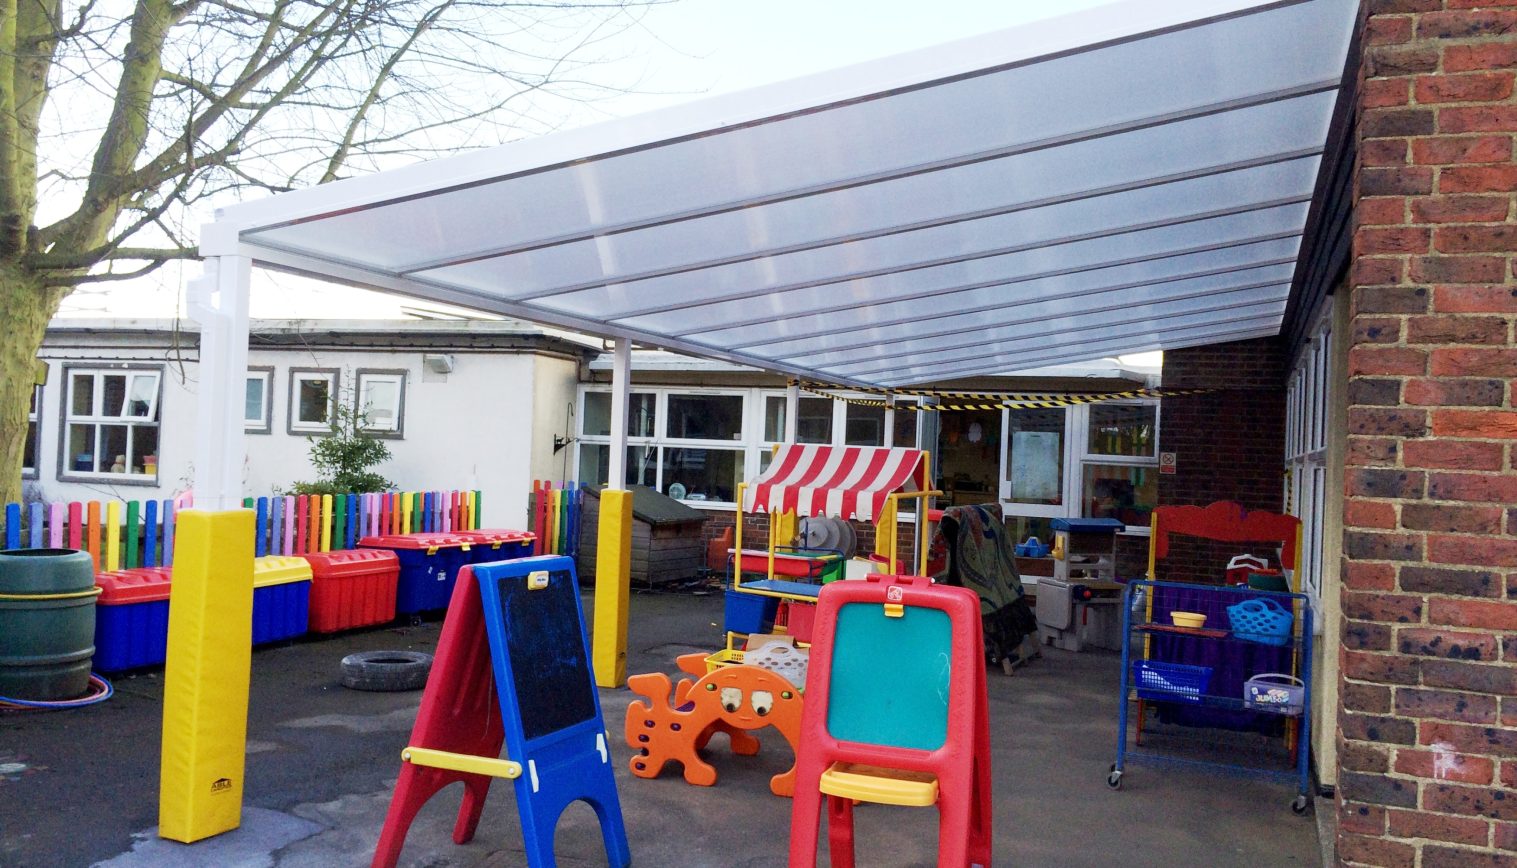 Pinkwell Primary School – 2nd Wall Mounted Canopy Installation